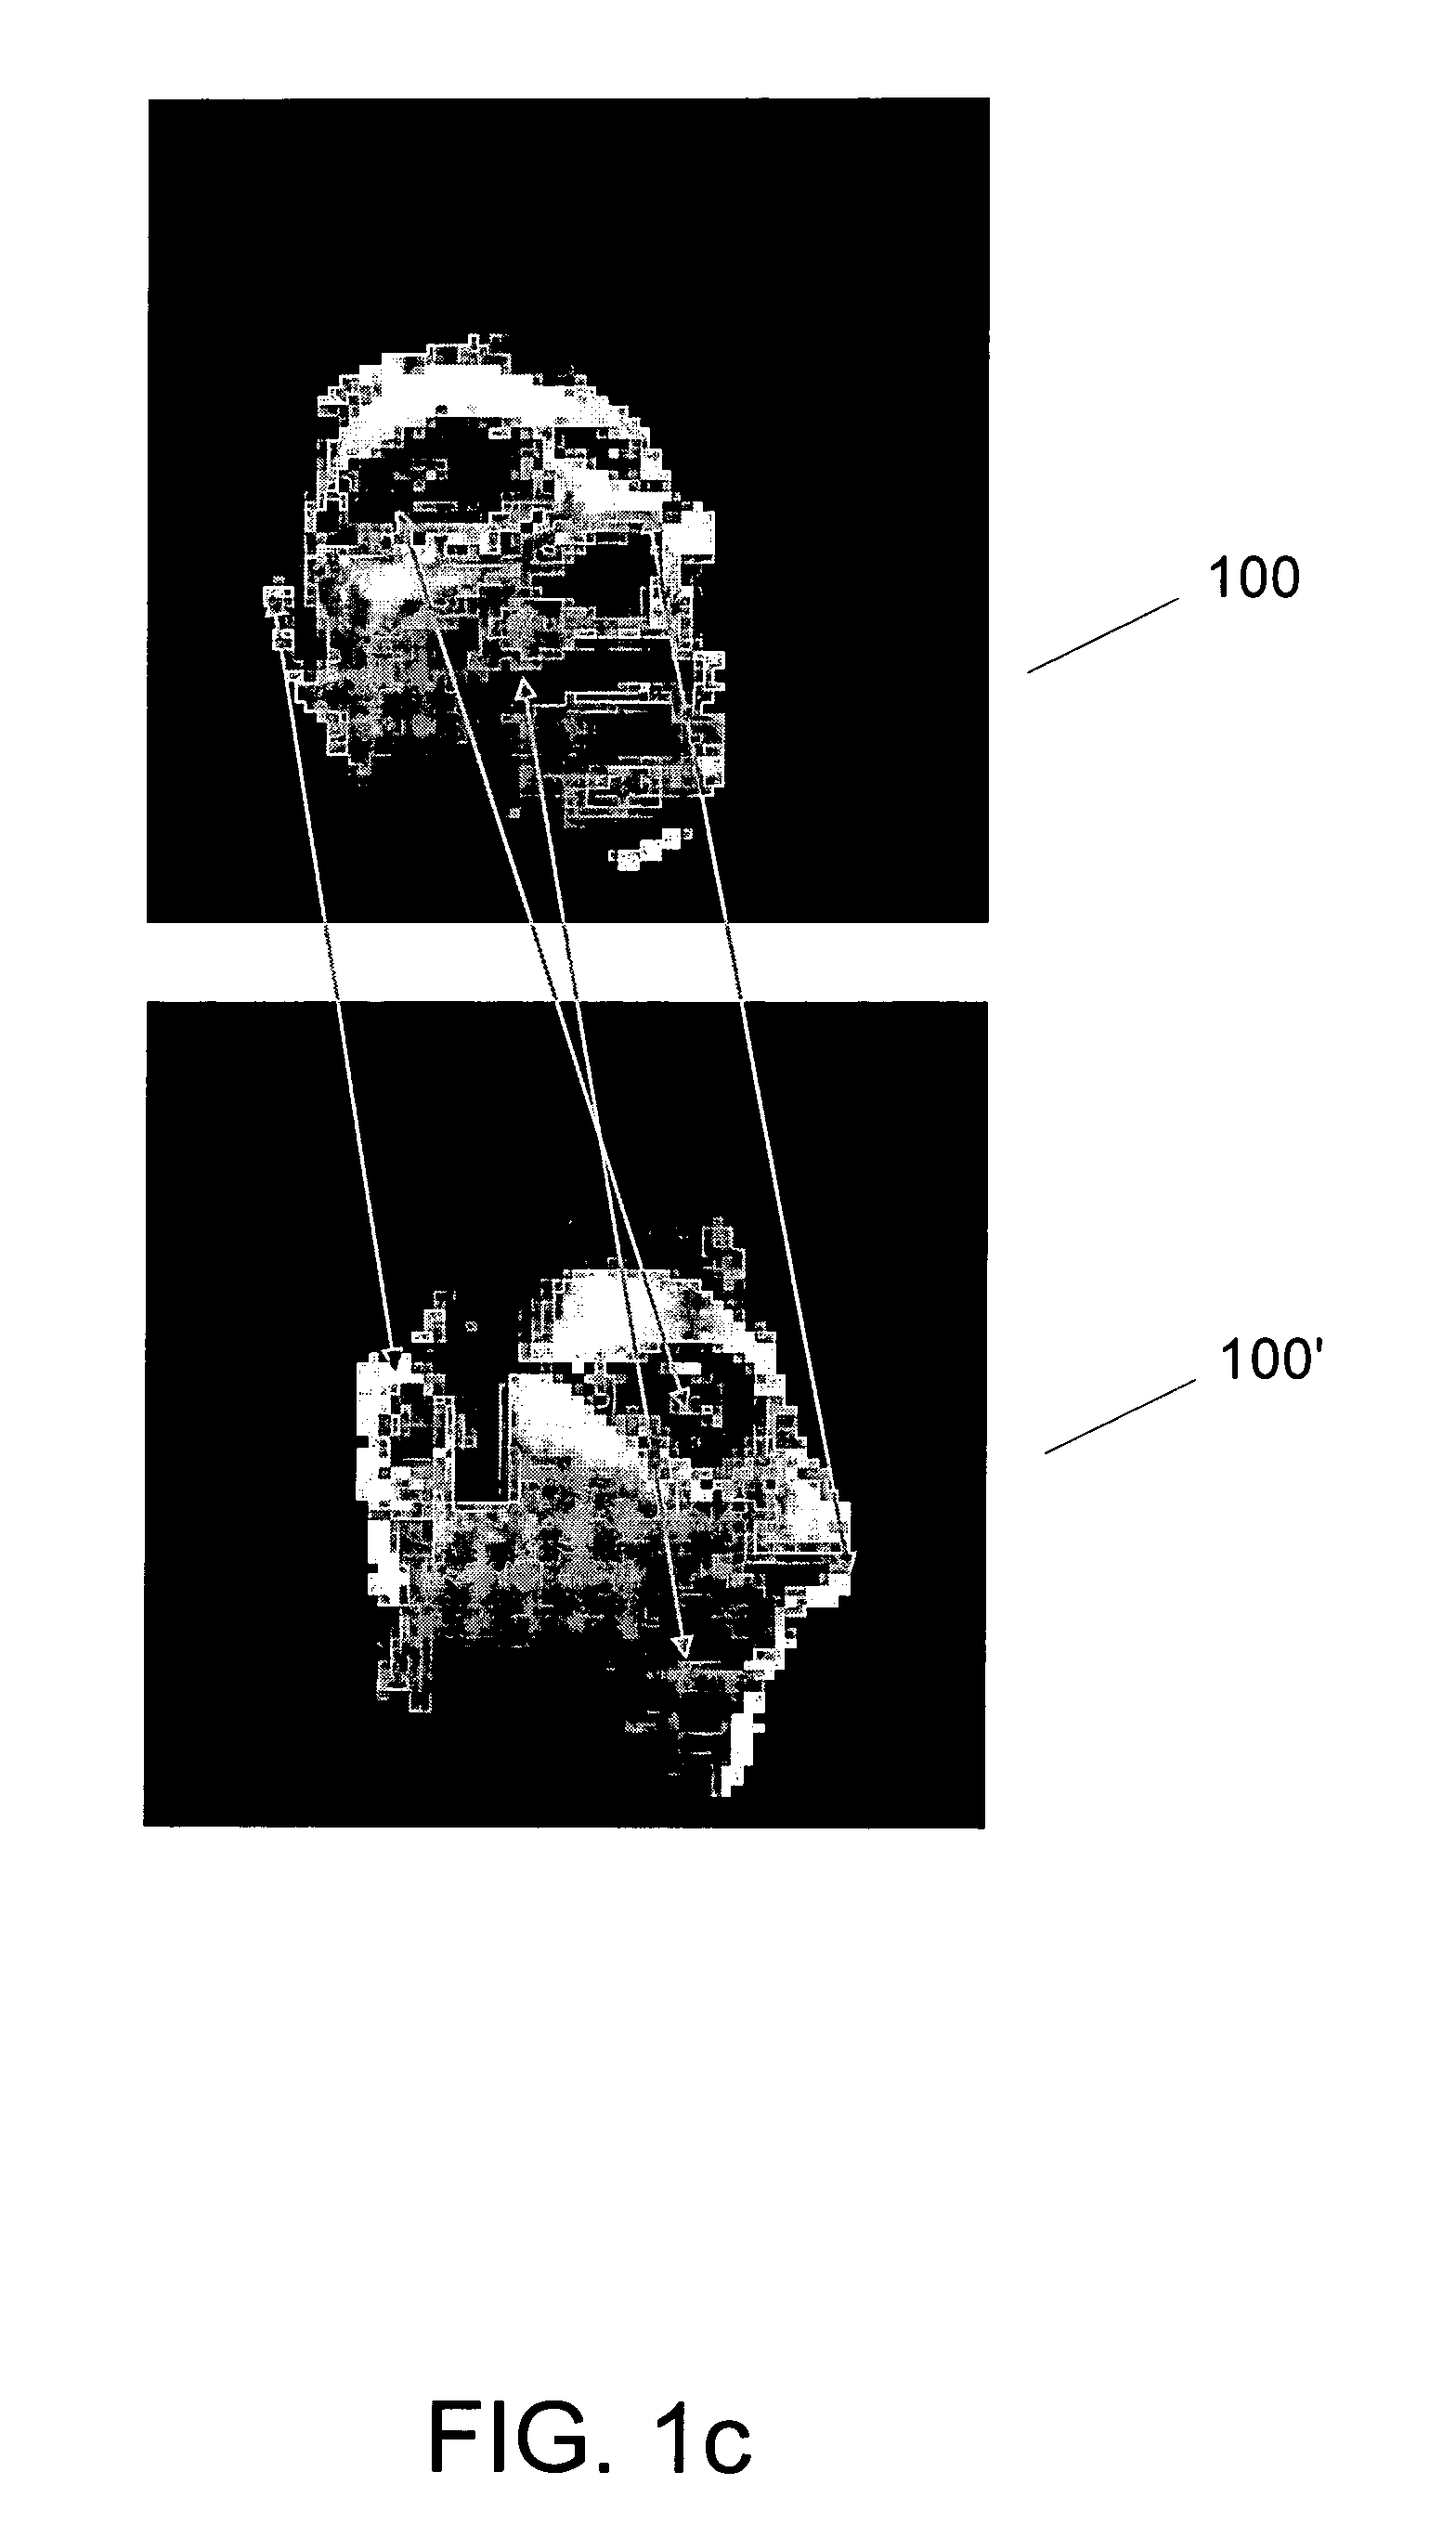 Ordered data compression system and methods using principle component analysis